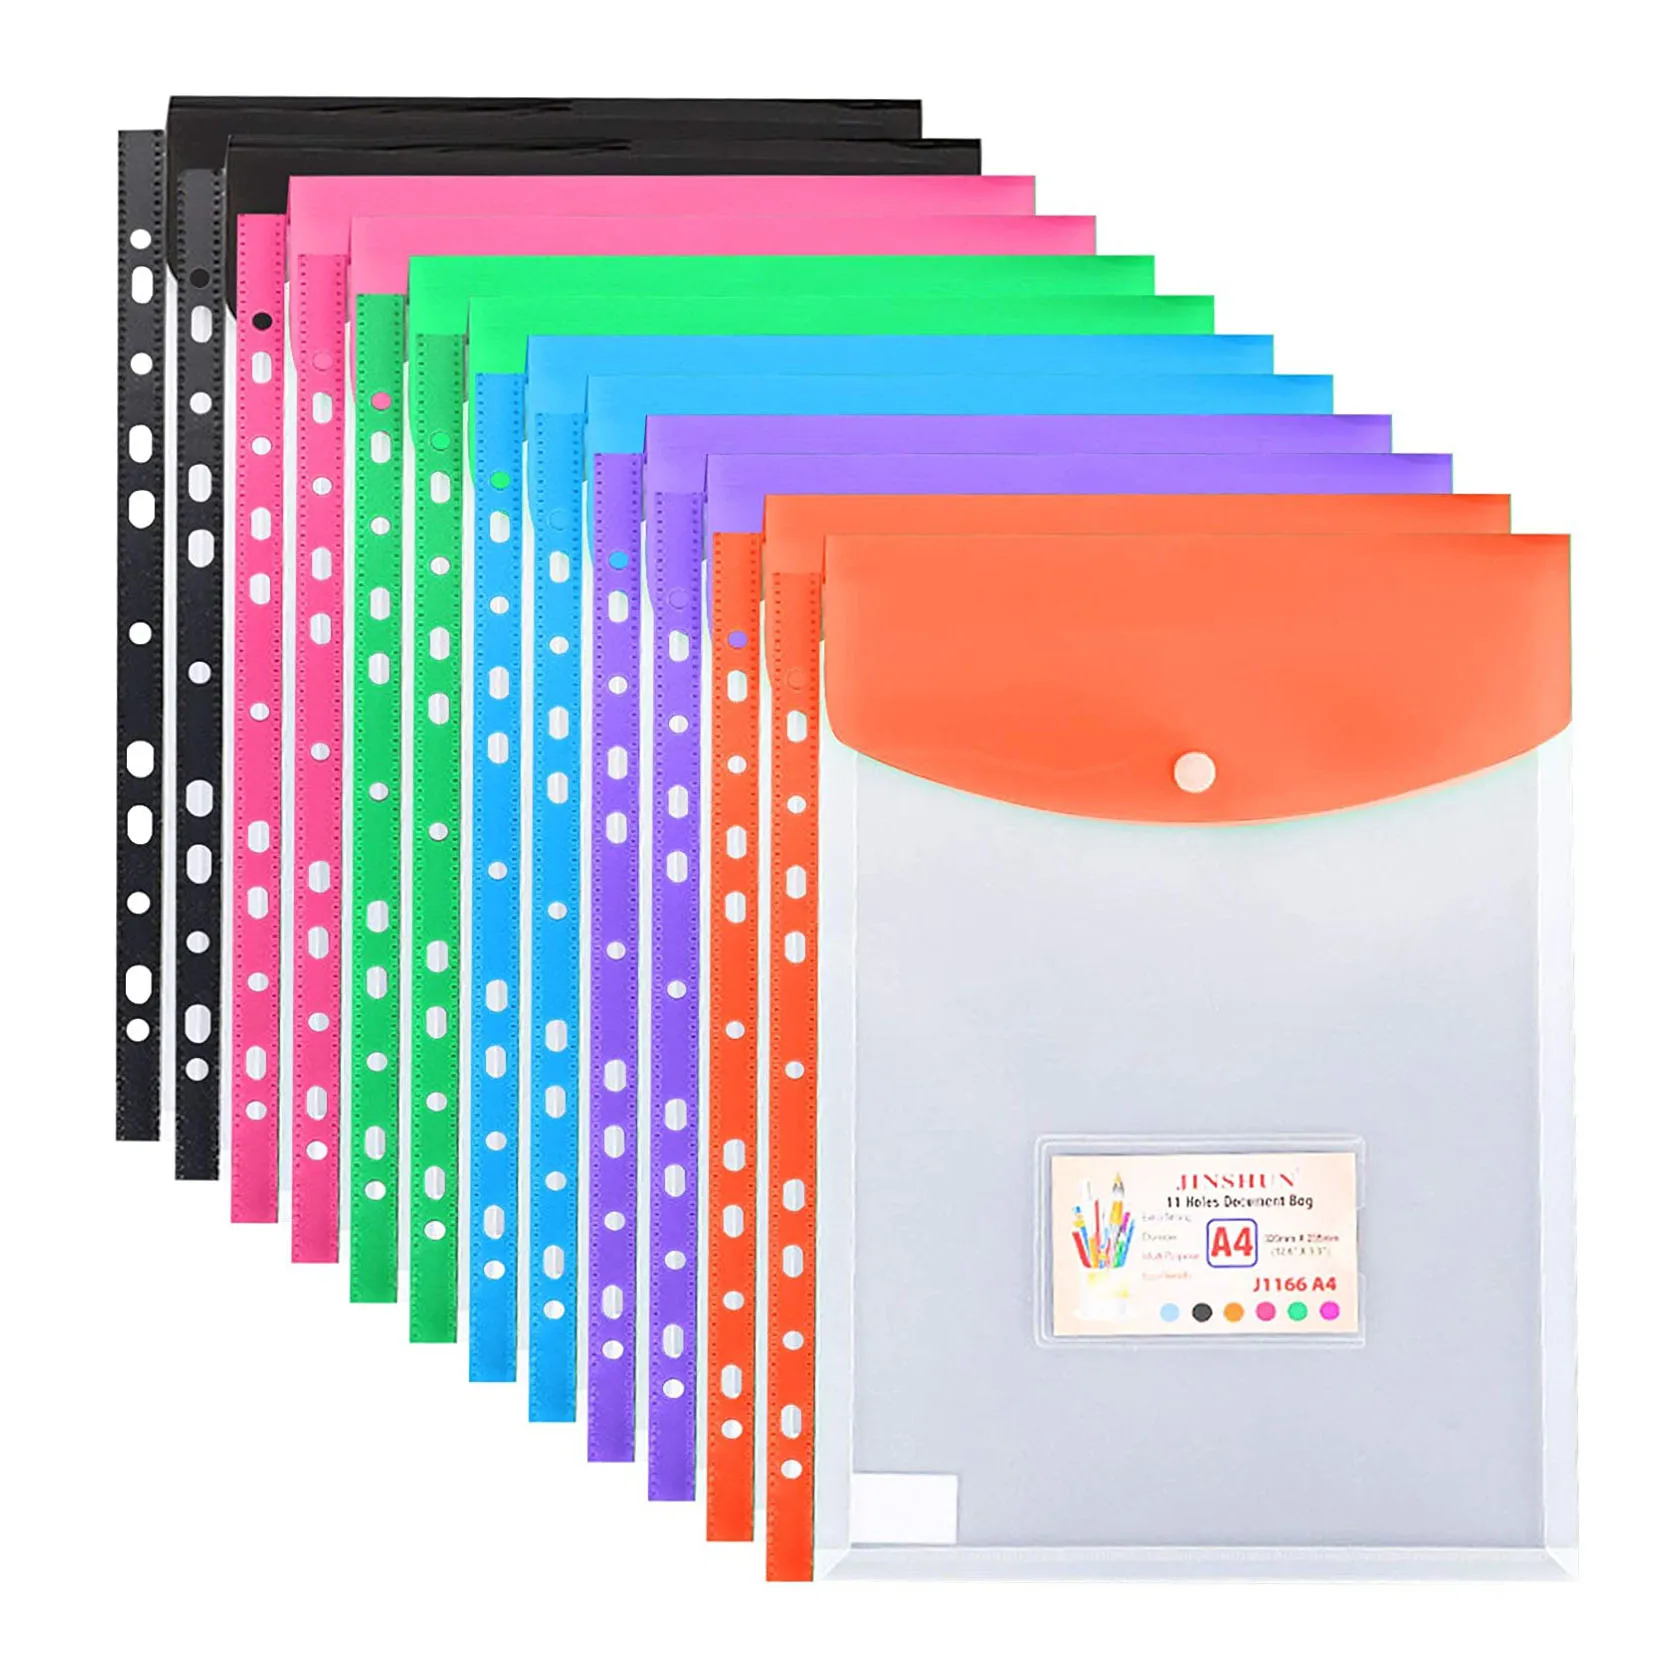 A4 Size Clear Plastic Waterproof Perforated Pockets with Button Closure for 11 Holes Files Binder Envelopes Folders Organizer